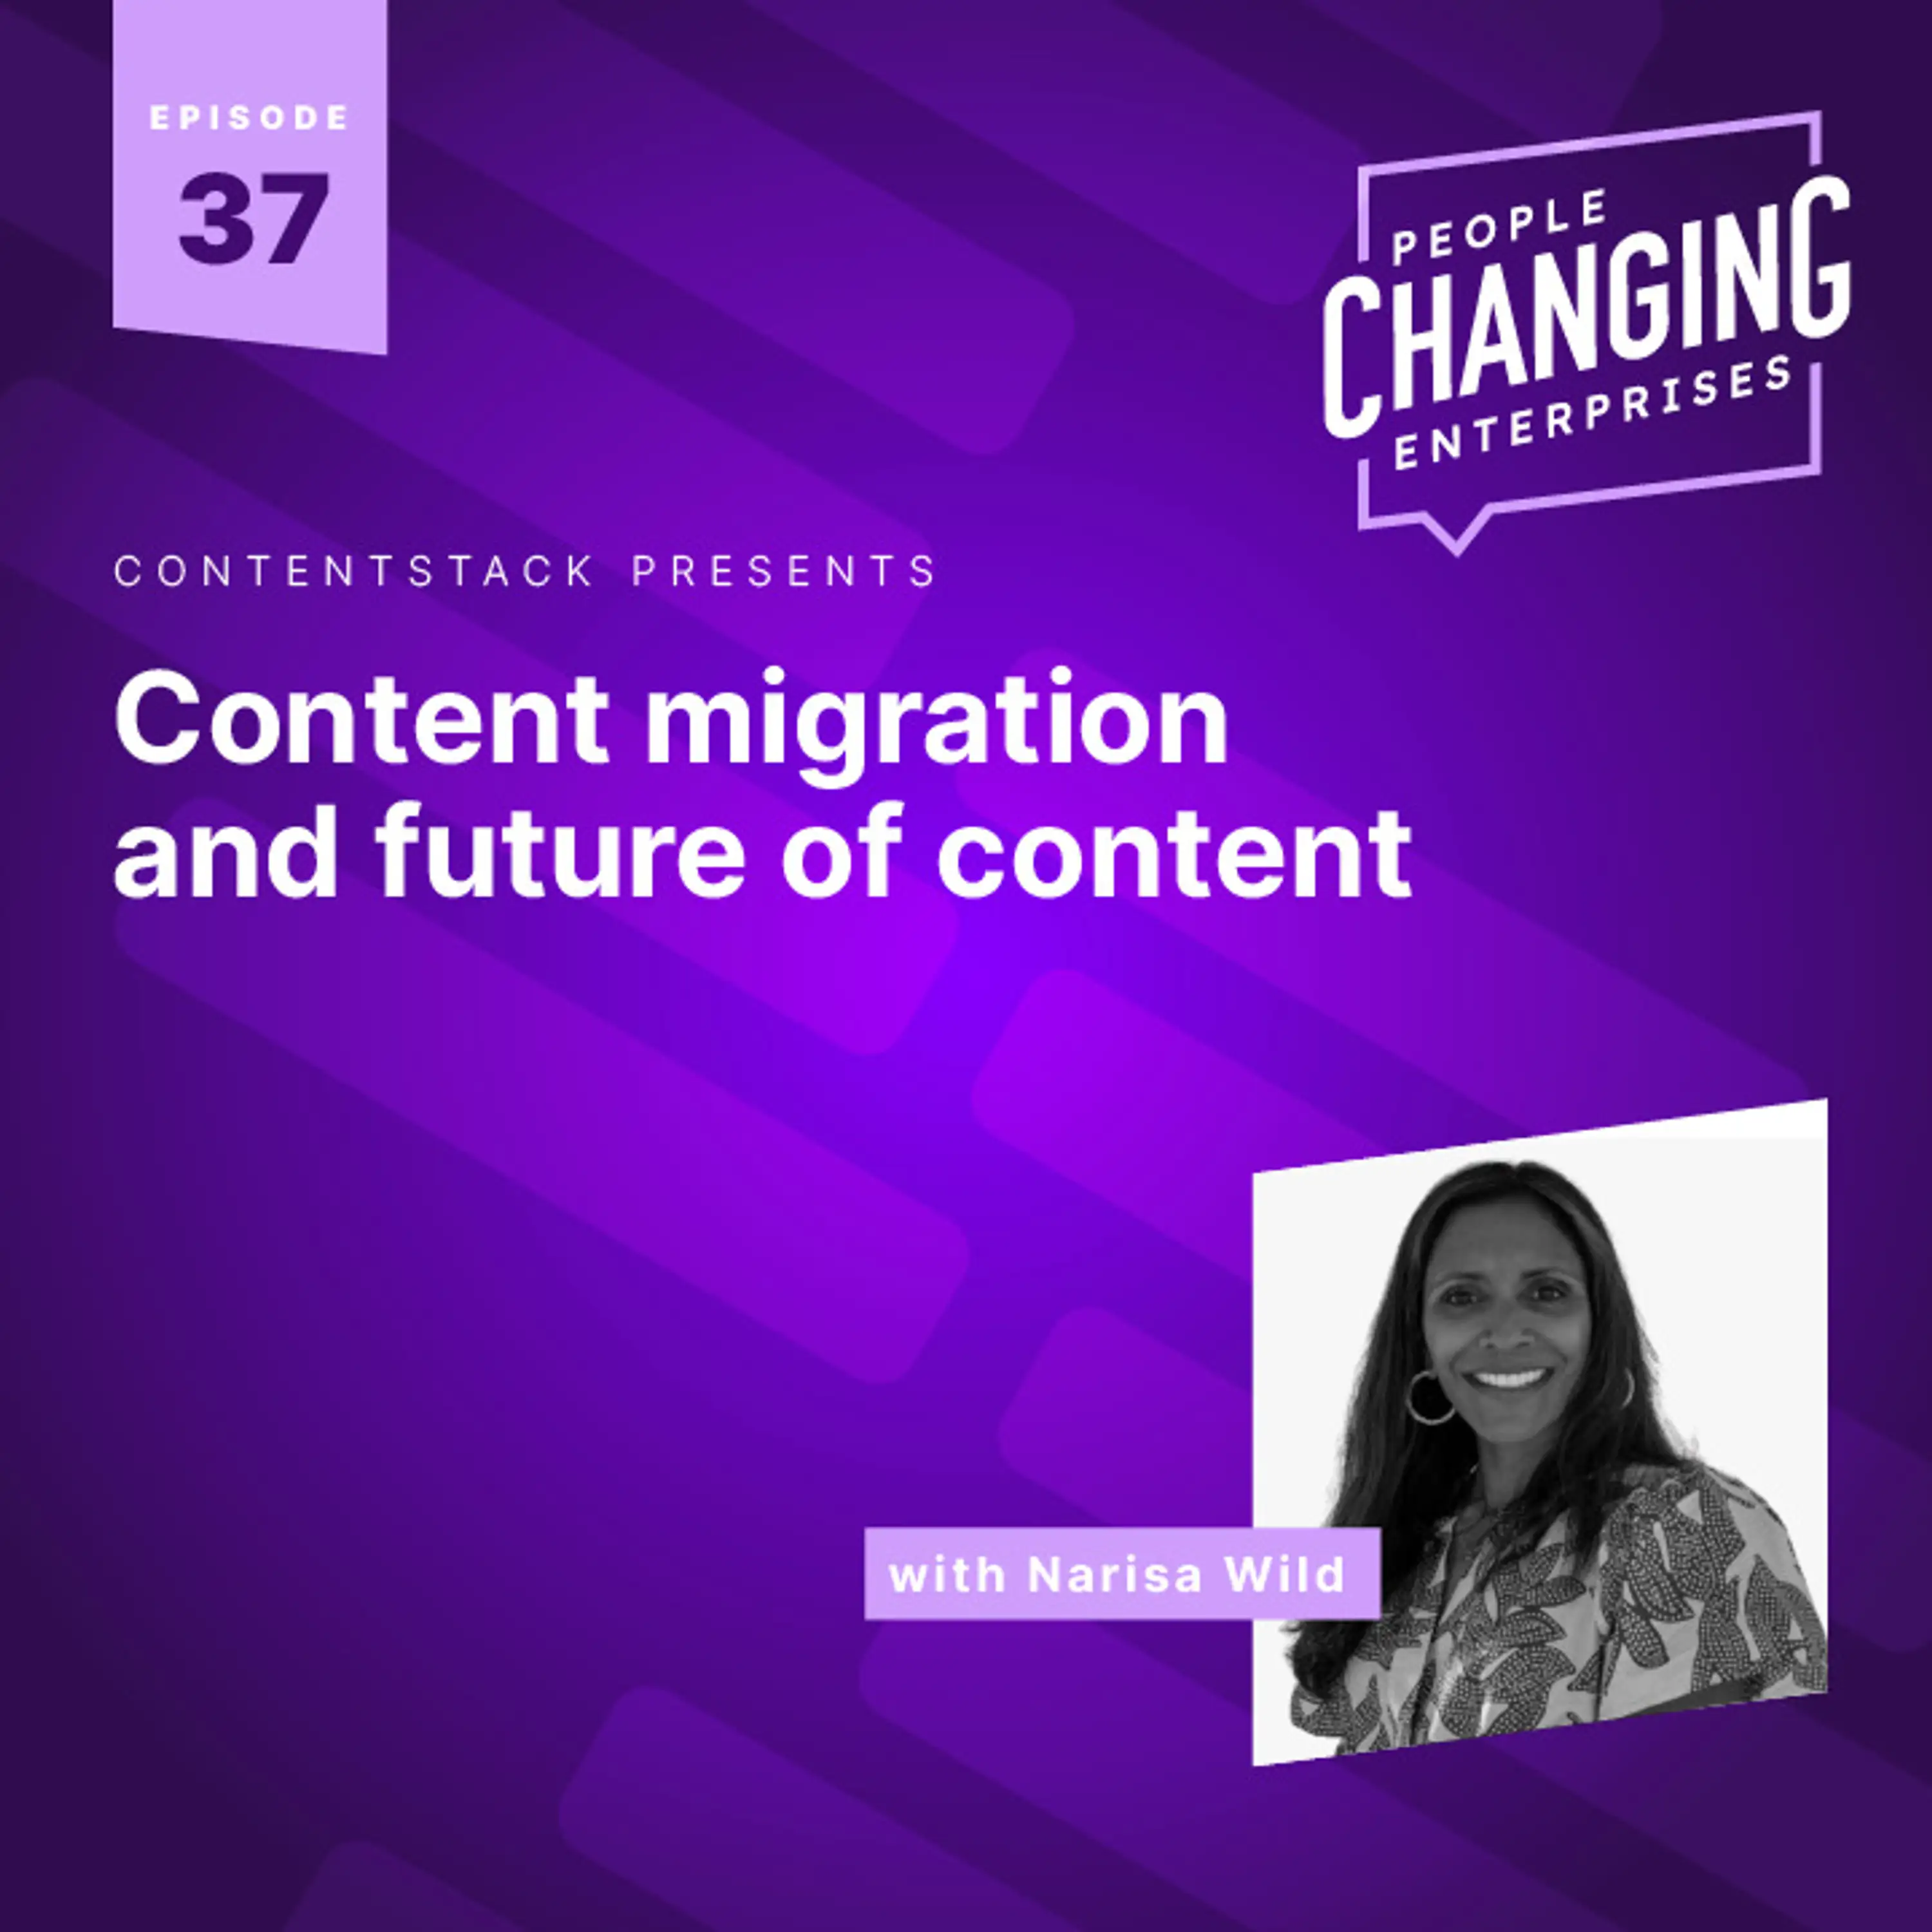 Content migration and future of content with Informa’s Narisa Wild